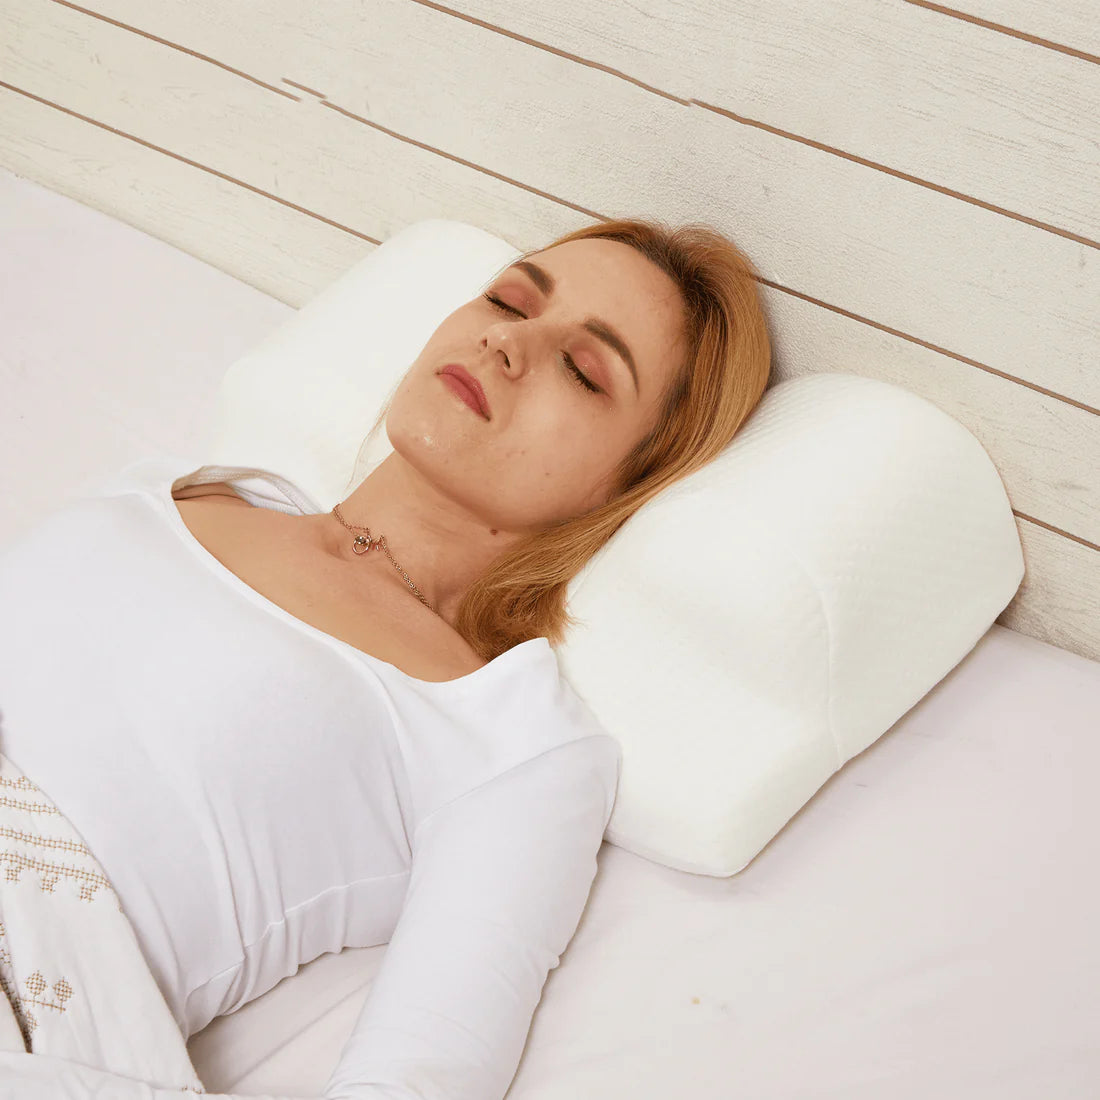 Experience Blissful Slumber with Our Memory Foam Beauty Sleep Pillow: Alleviate Neck and Shoulder Pain Today!